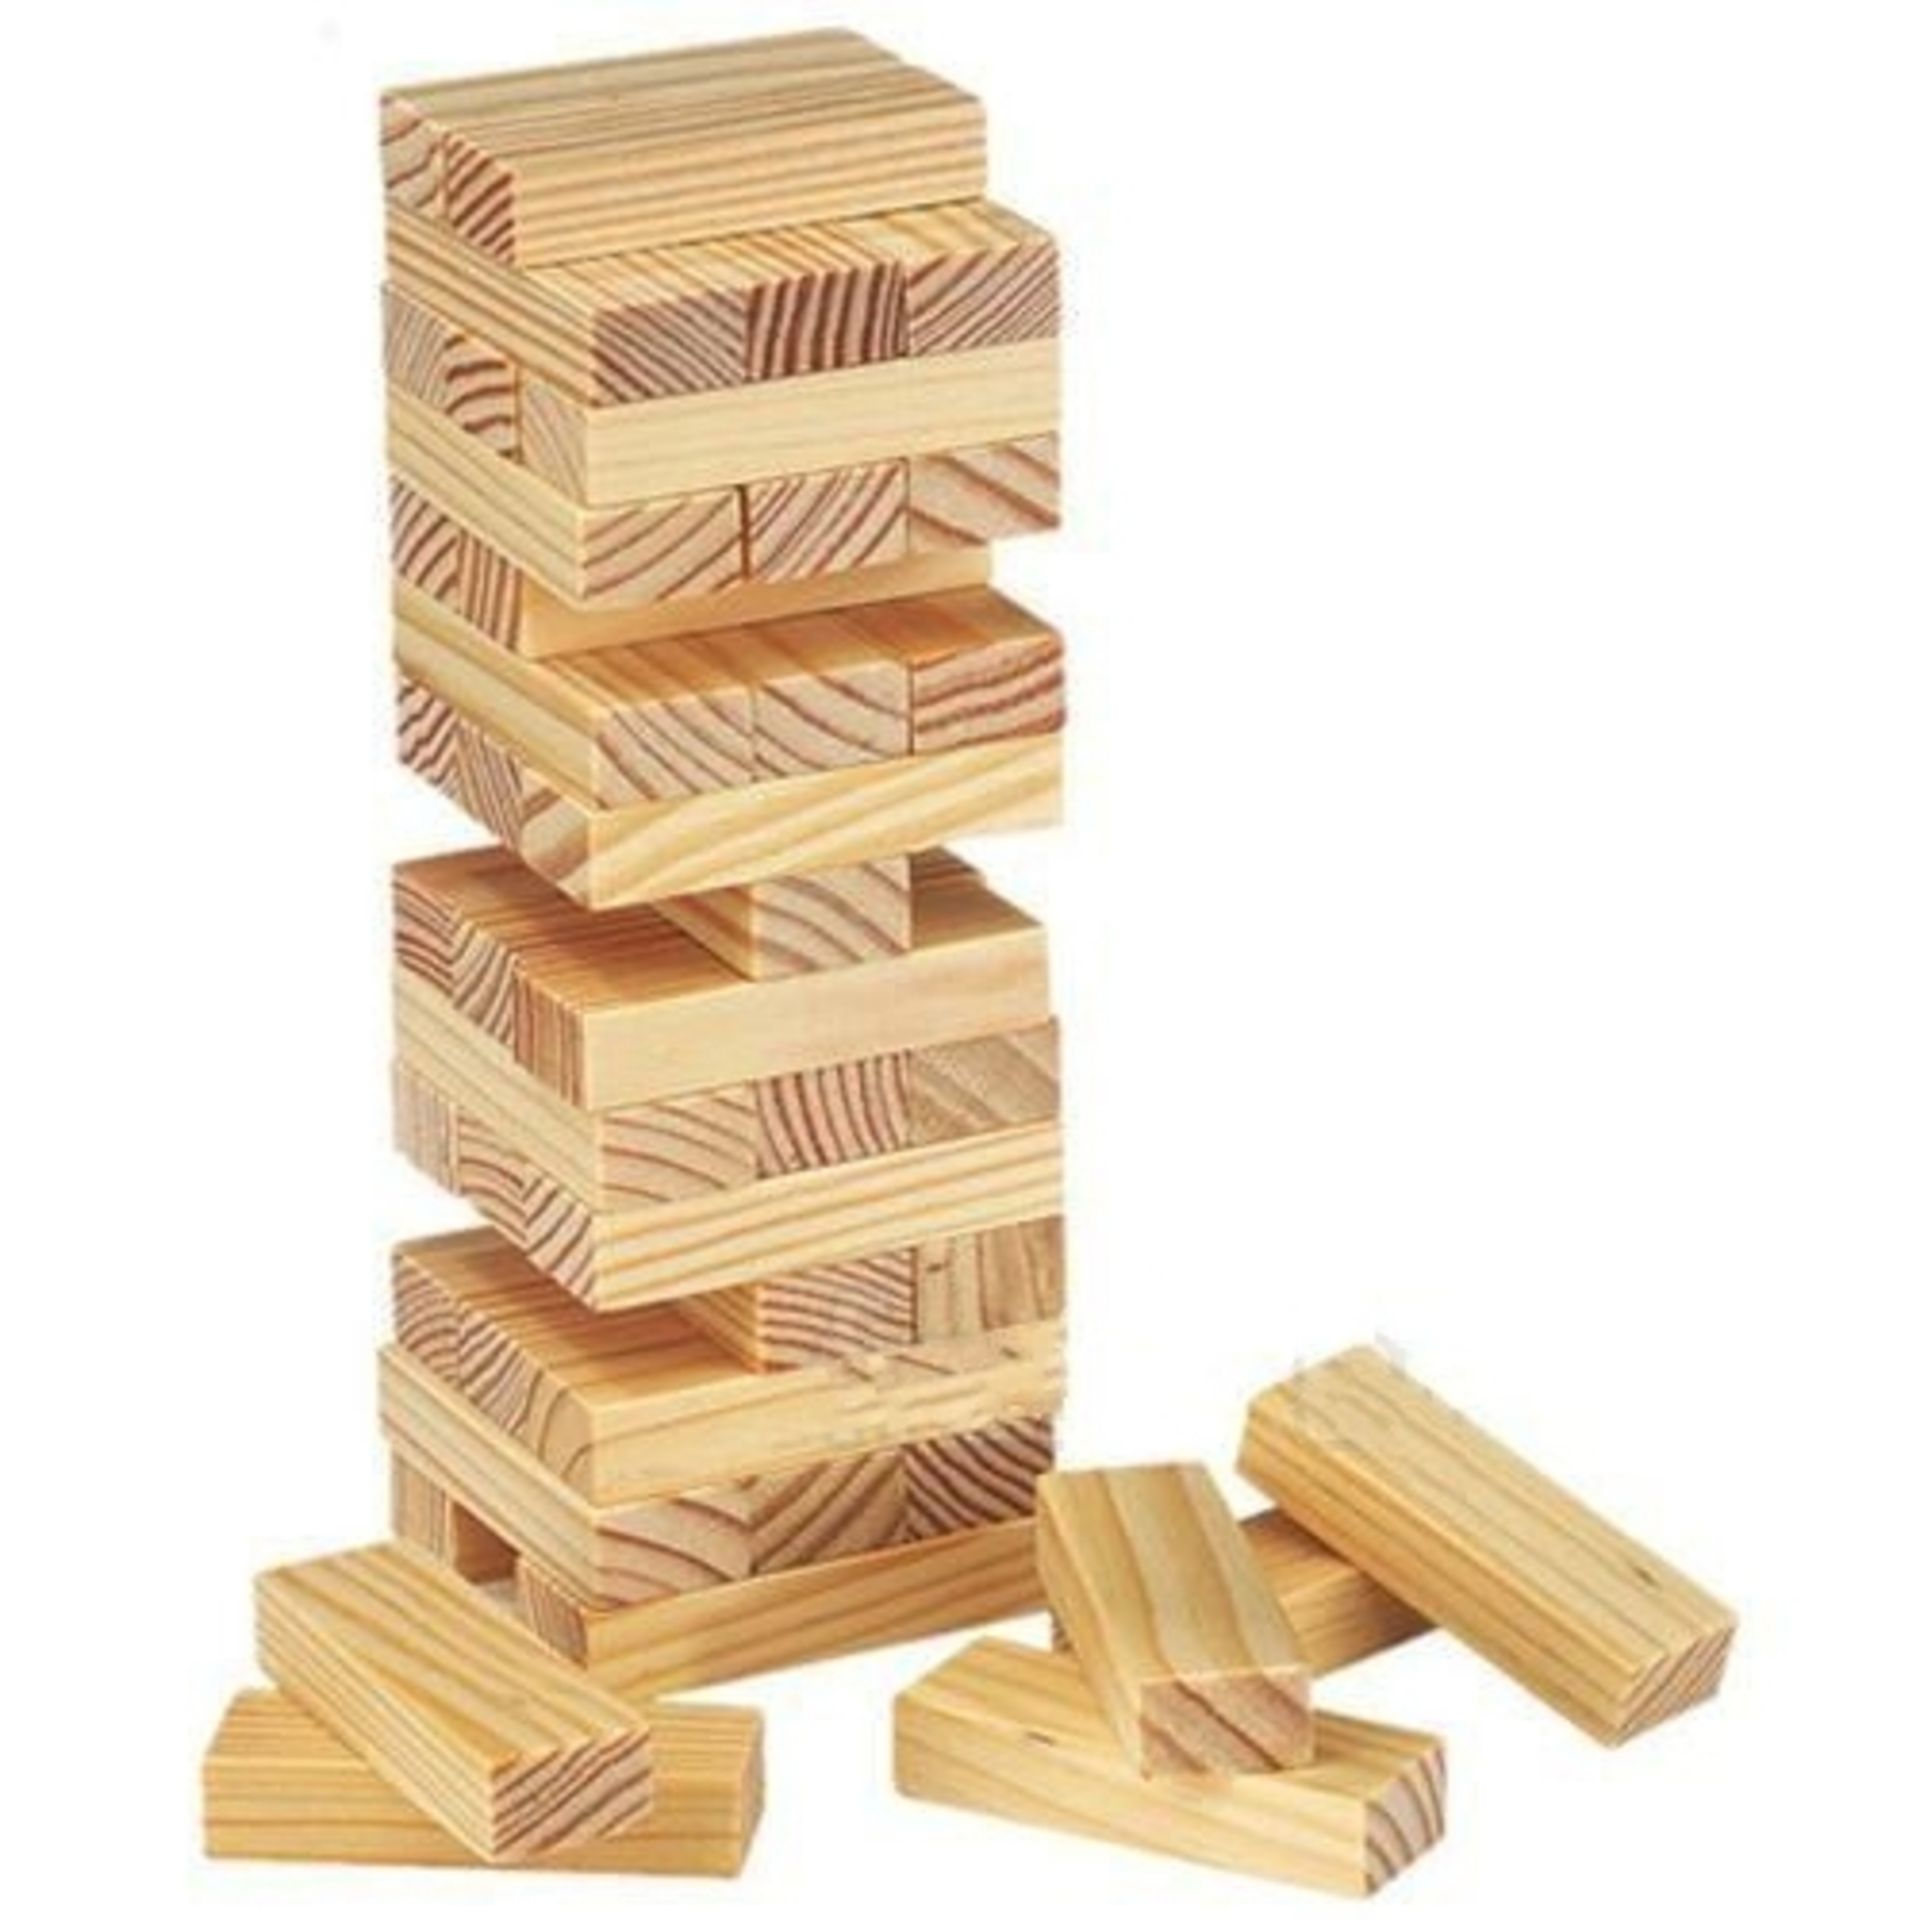 V Brand New Quality Wooden Tower Block Game X 5 Bid price to be multiplied by Five